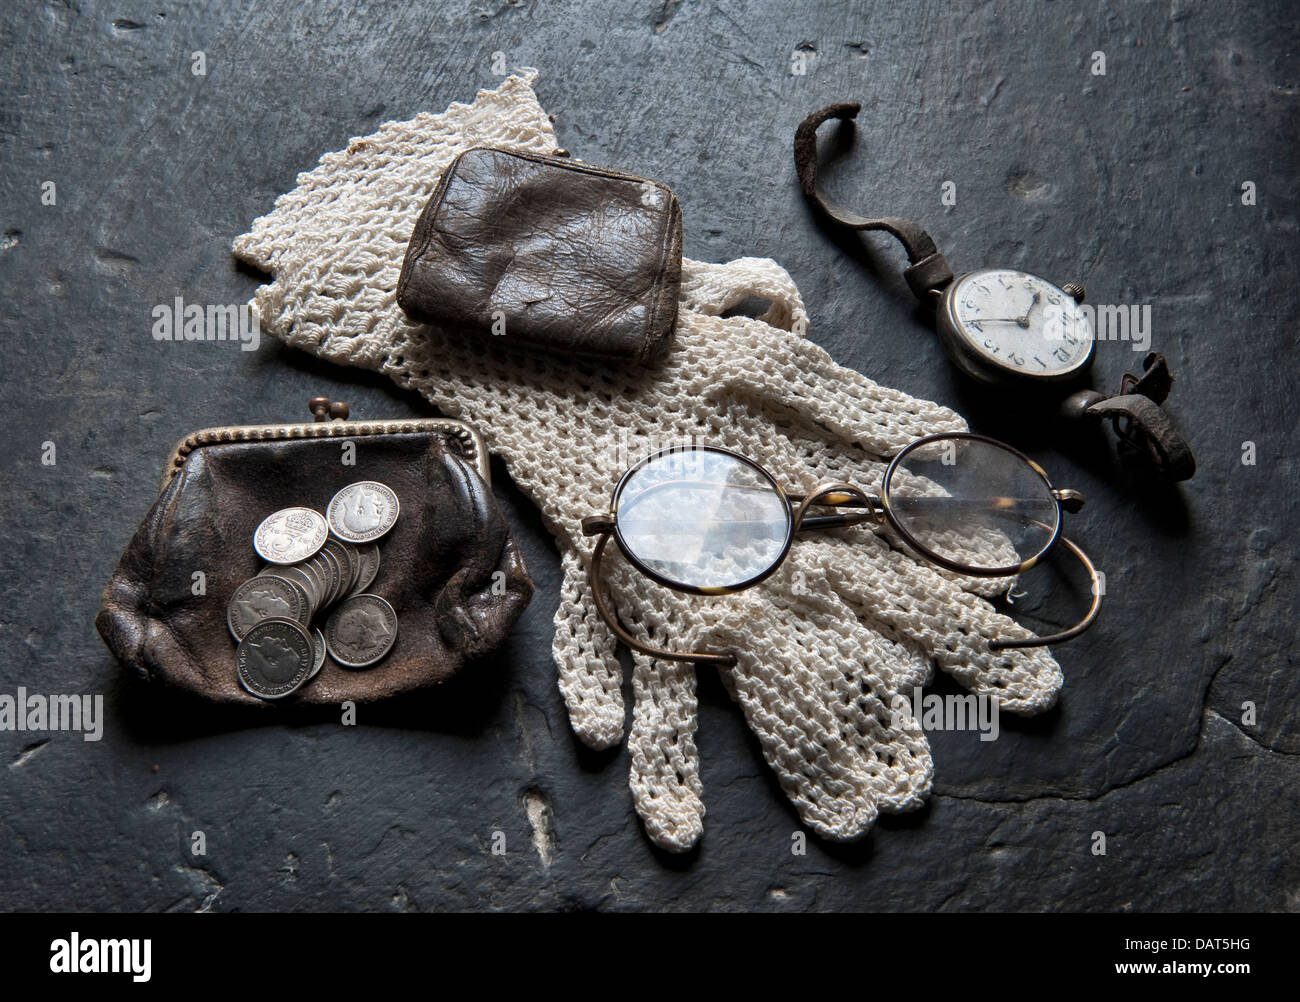 The modest belongings of a lower middle class Edwardian woman - purse, gloves, spectacles, watch etc, in a reconstruction of a typical cottage (UK) Stock Photo